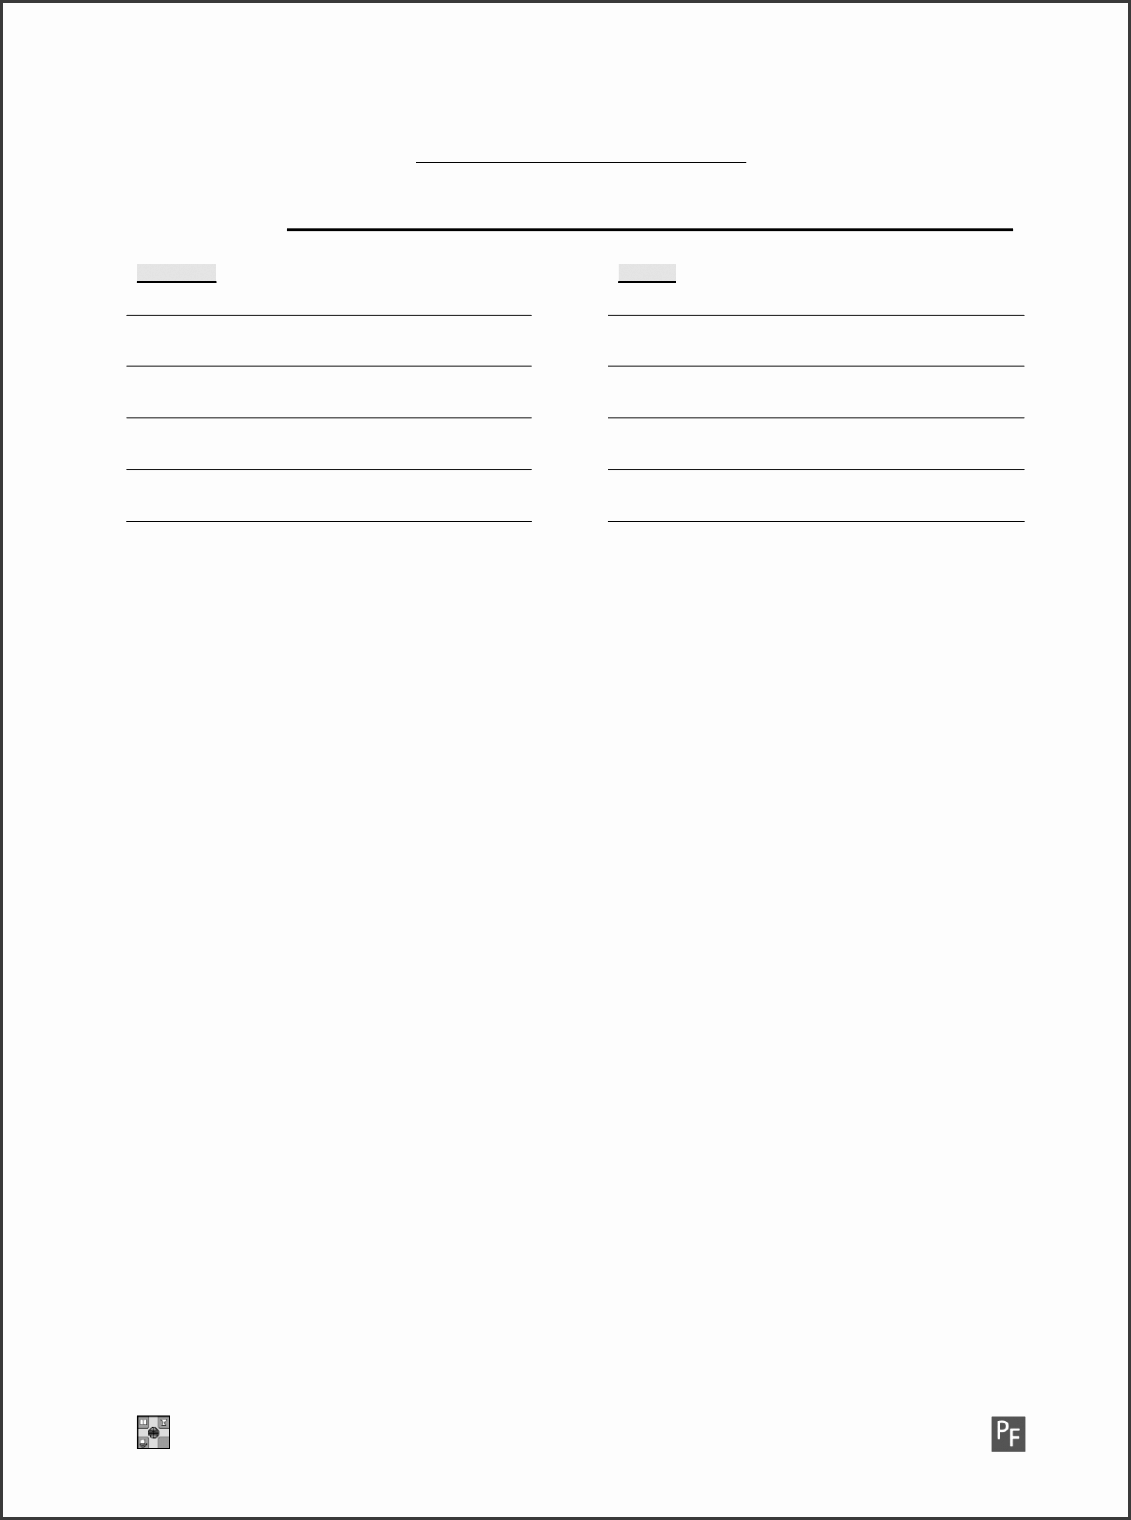 permission slip template in word and pdf formats page 3 of 3